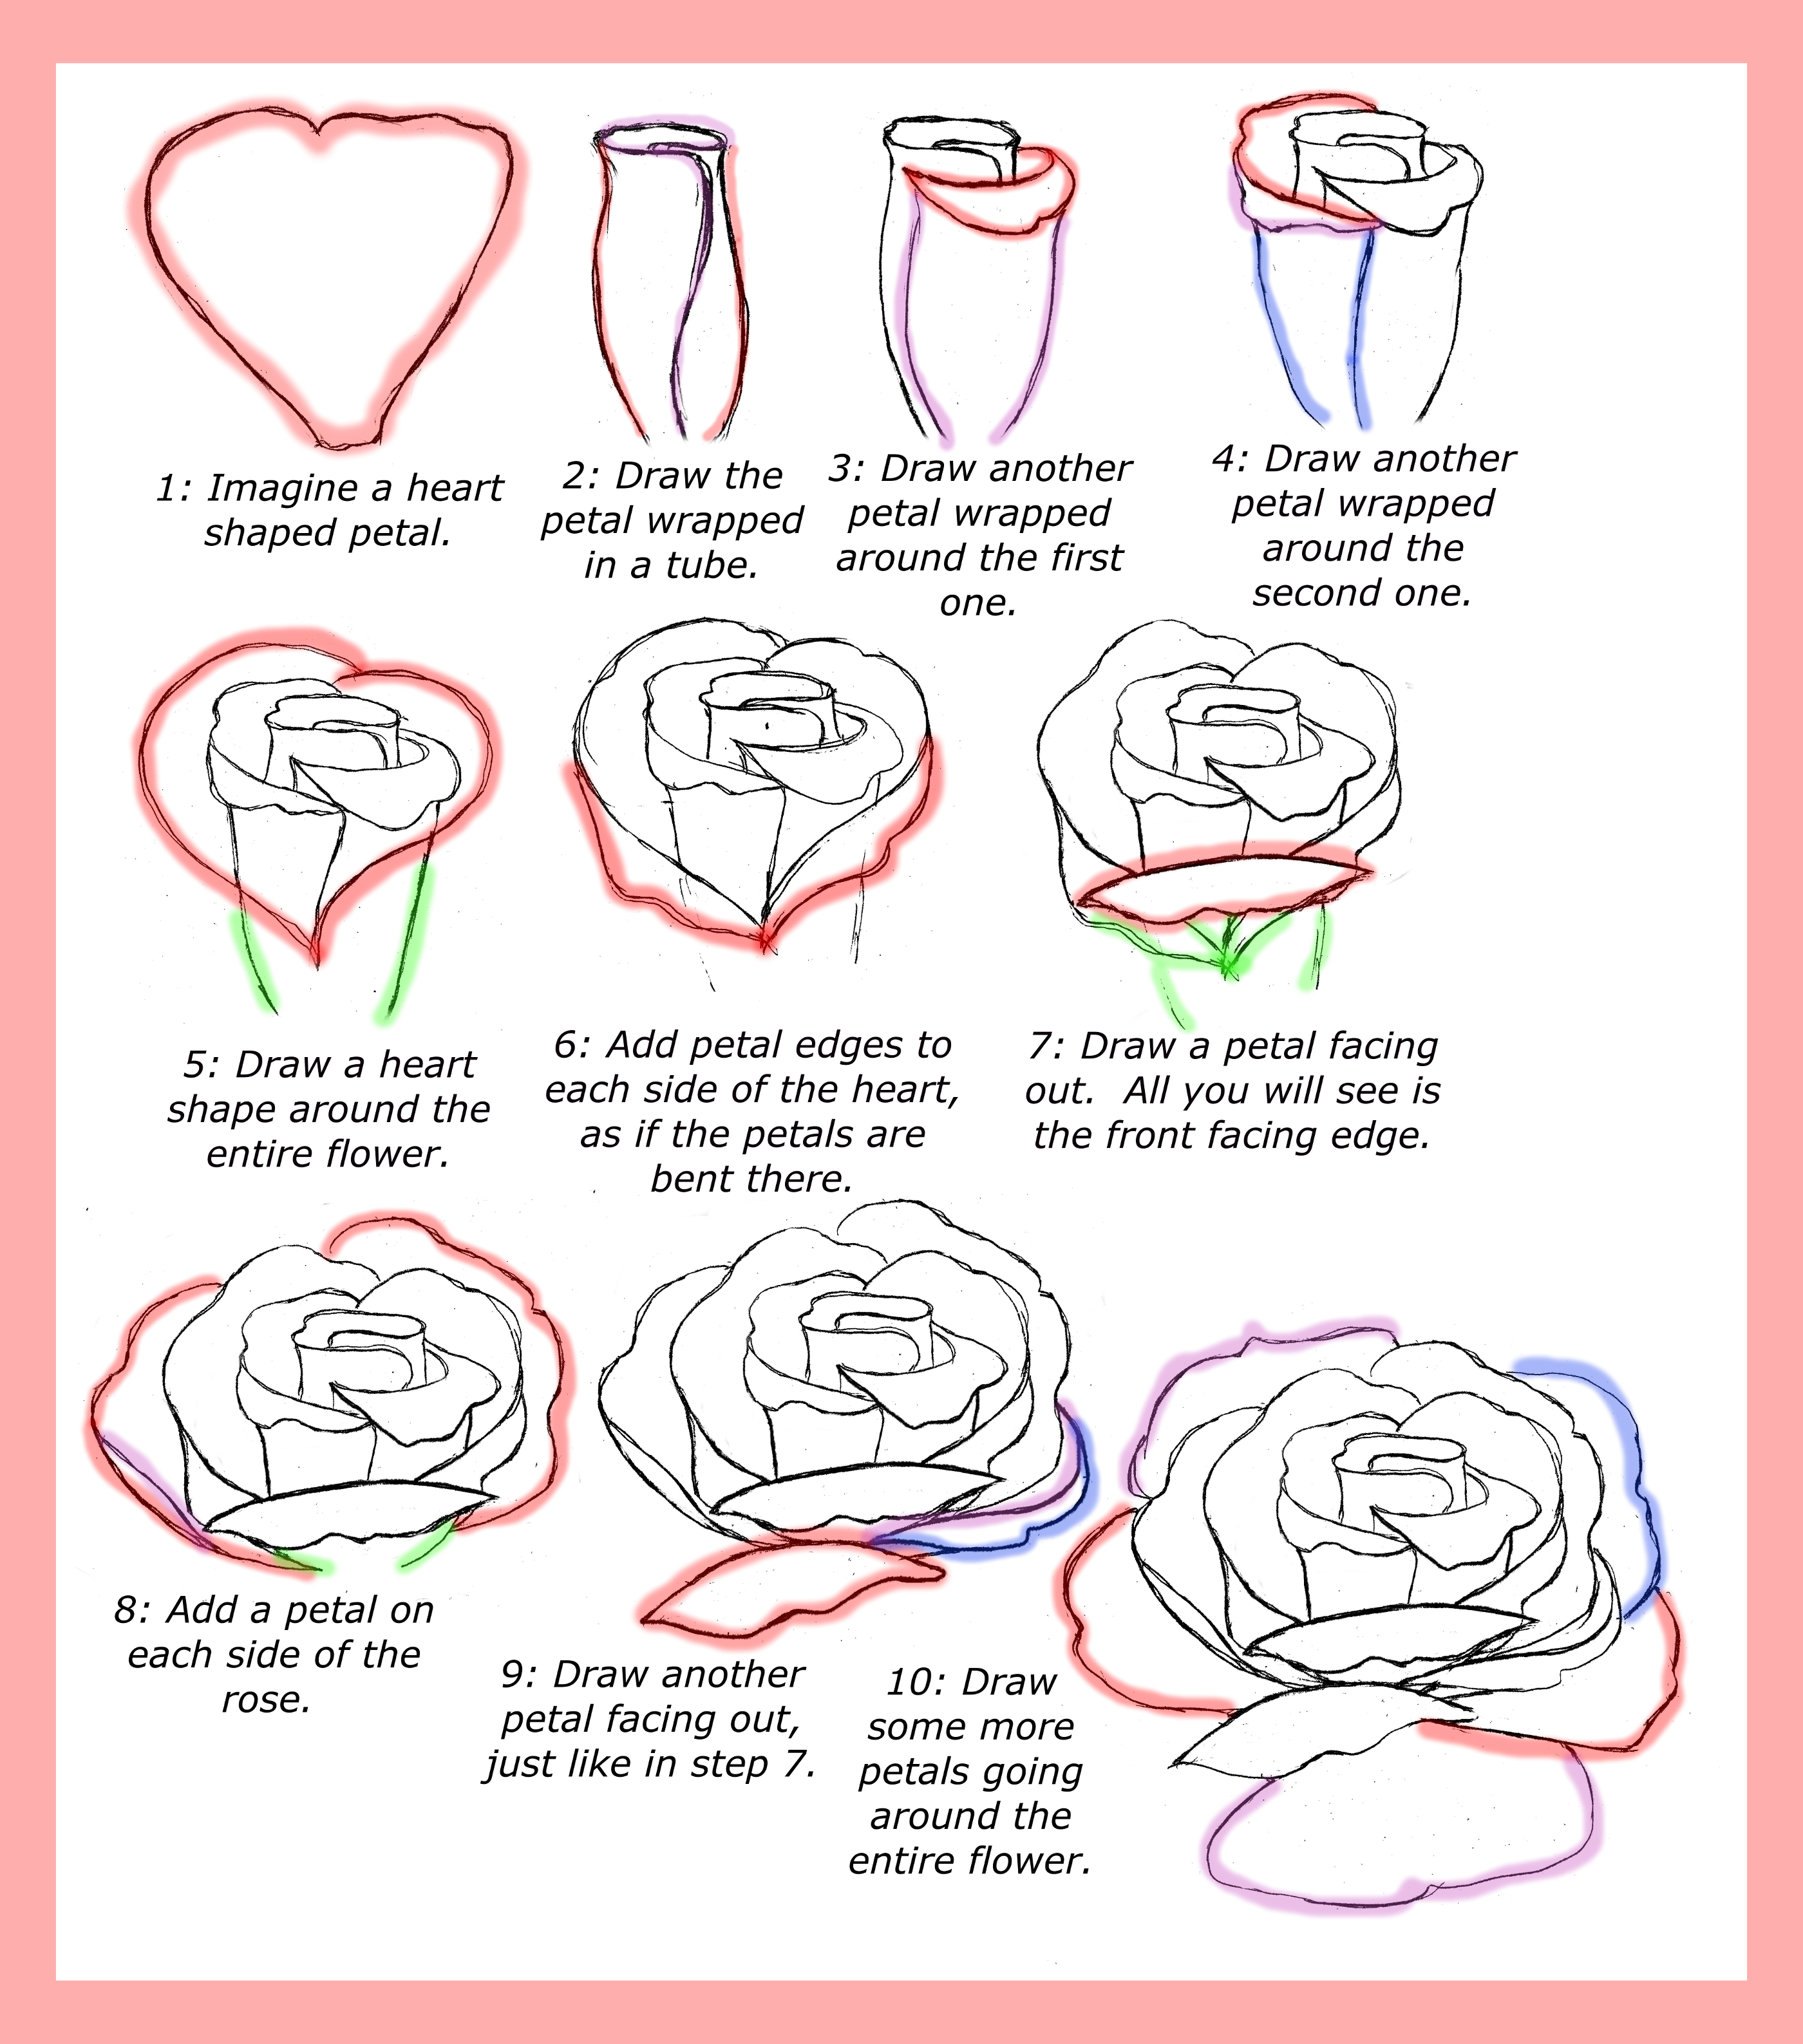 Top How To Draw A Rose Pictures in the world Check it out now 